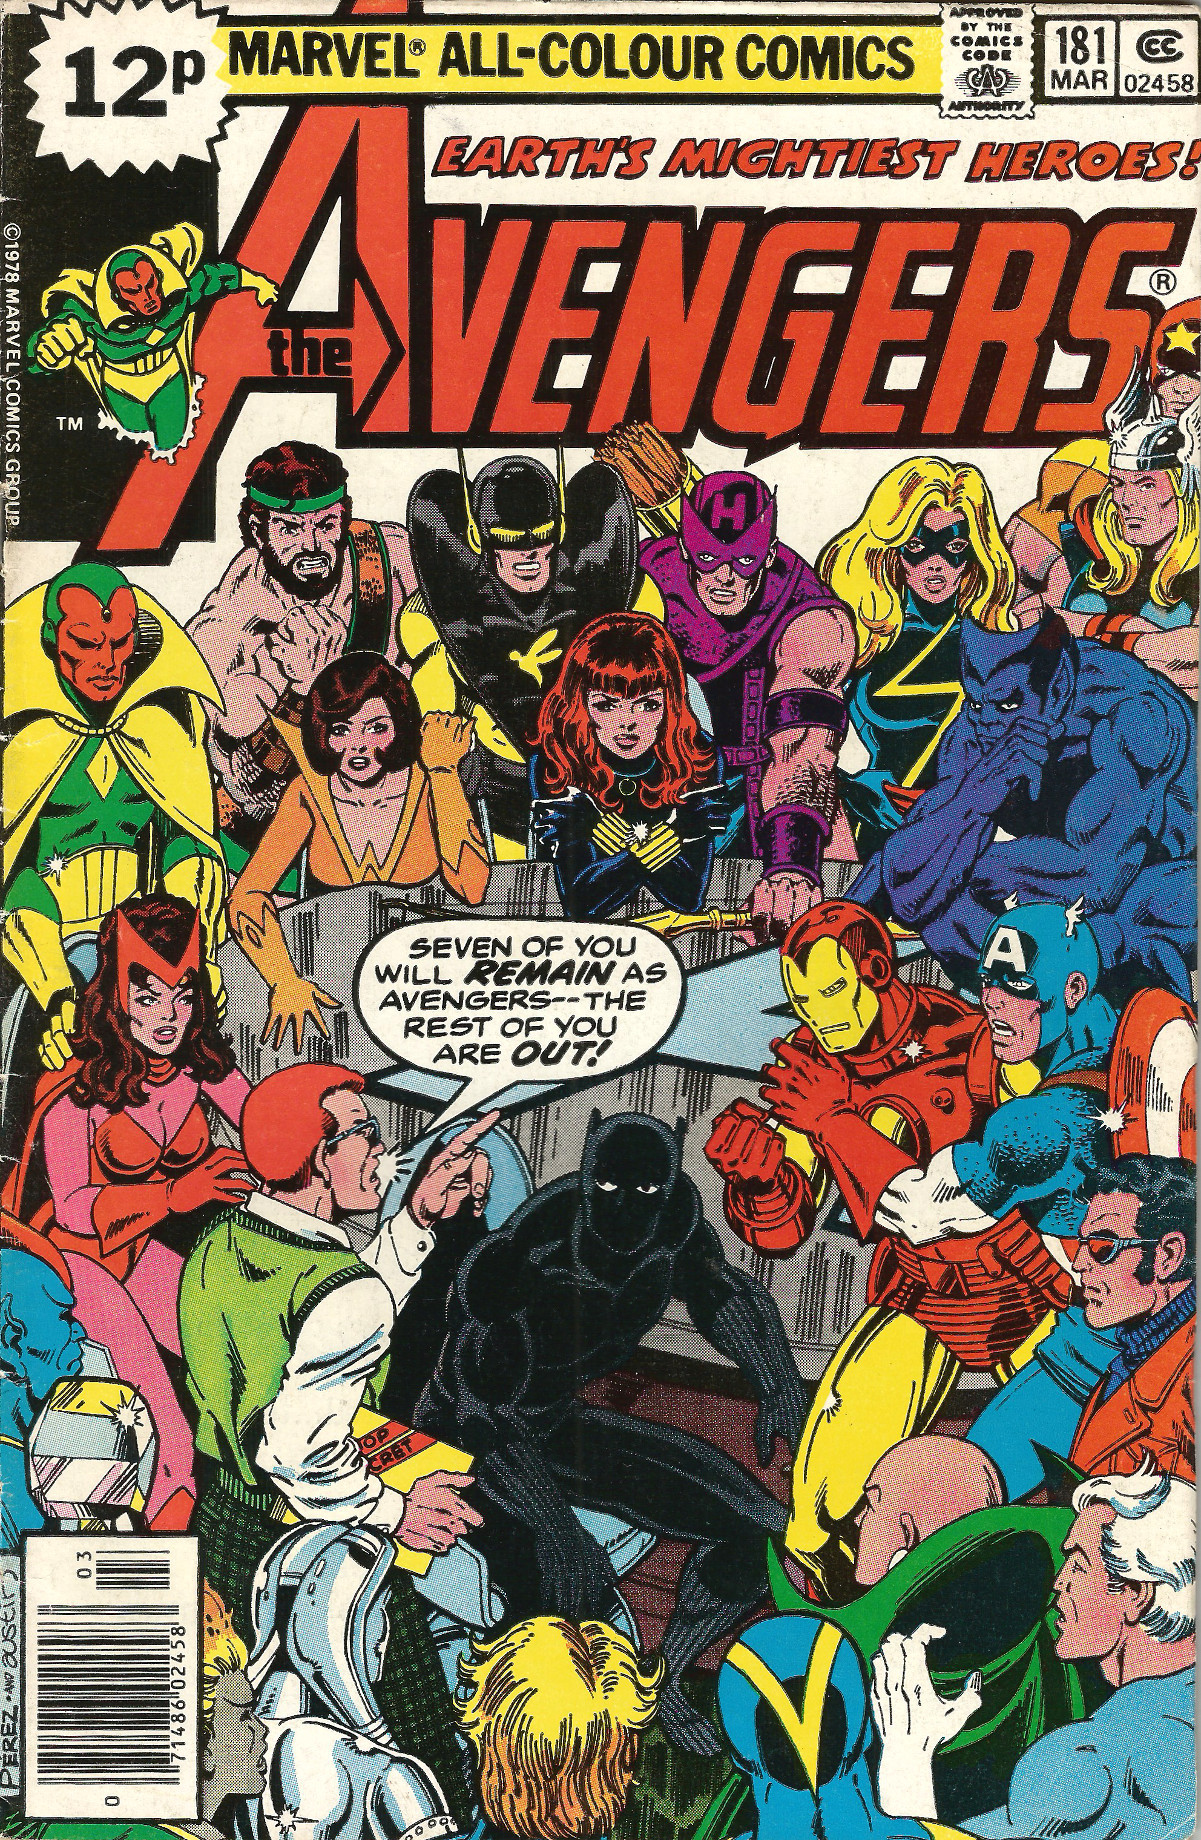 Avengers No. 181 (Marvel Comics, 1977). Cover art by George Perez and Terry Austin.